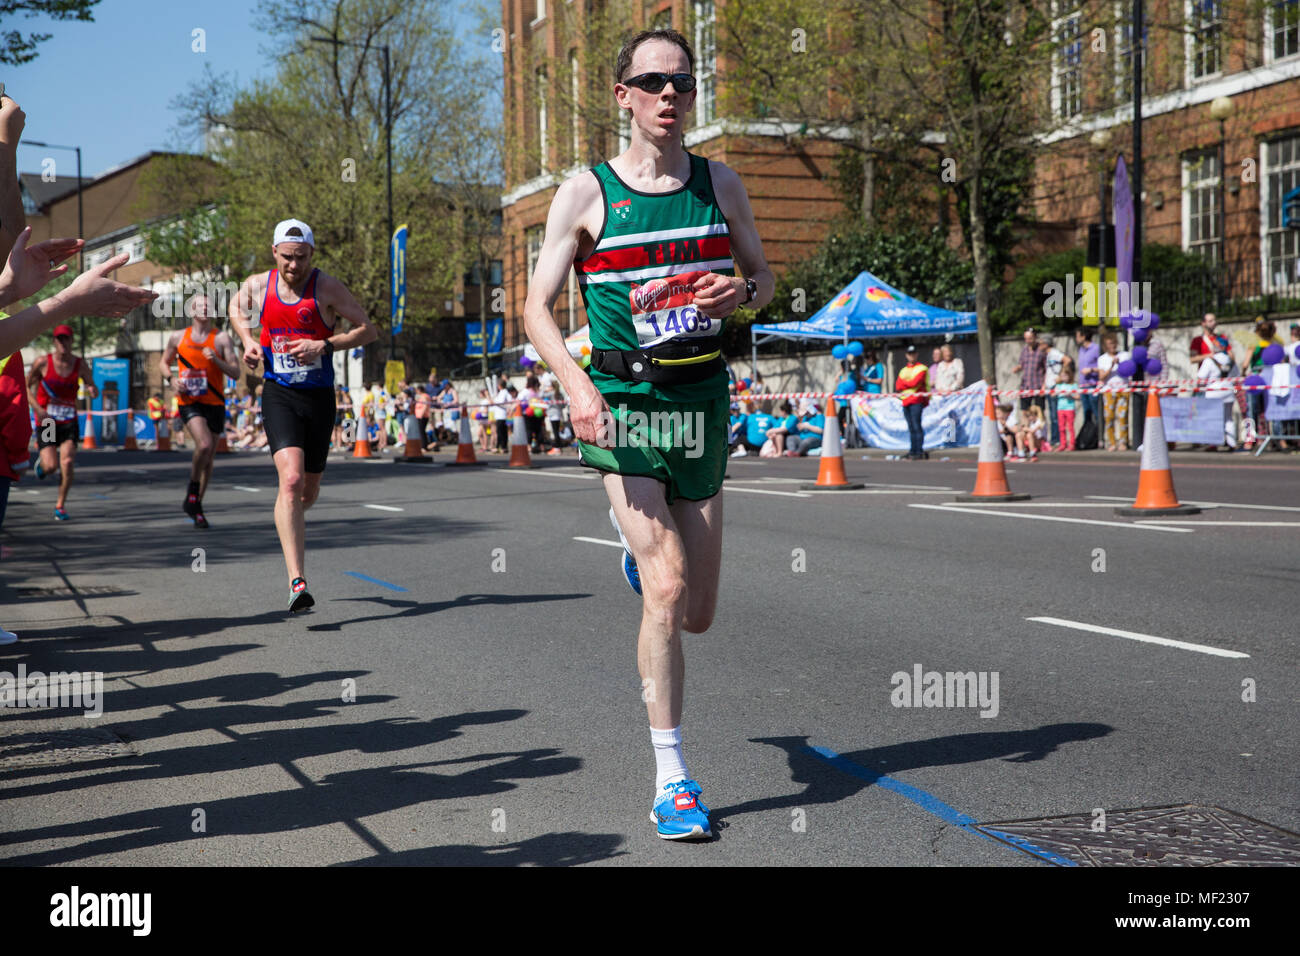 dokumentarfilm Forstærke Rund ned London, UK. 22nd April, 2018. Tim Kennedy of Sale Harriers Manchester  competes in the 2018 Virgin Money London Marathon. The 38th edition of the  race was the hottest on record with a